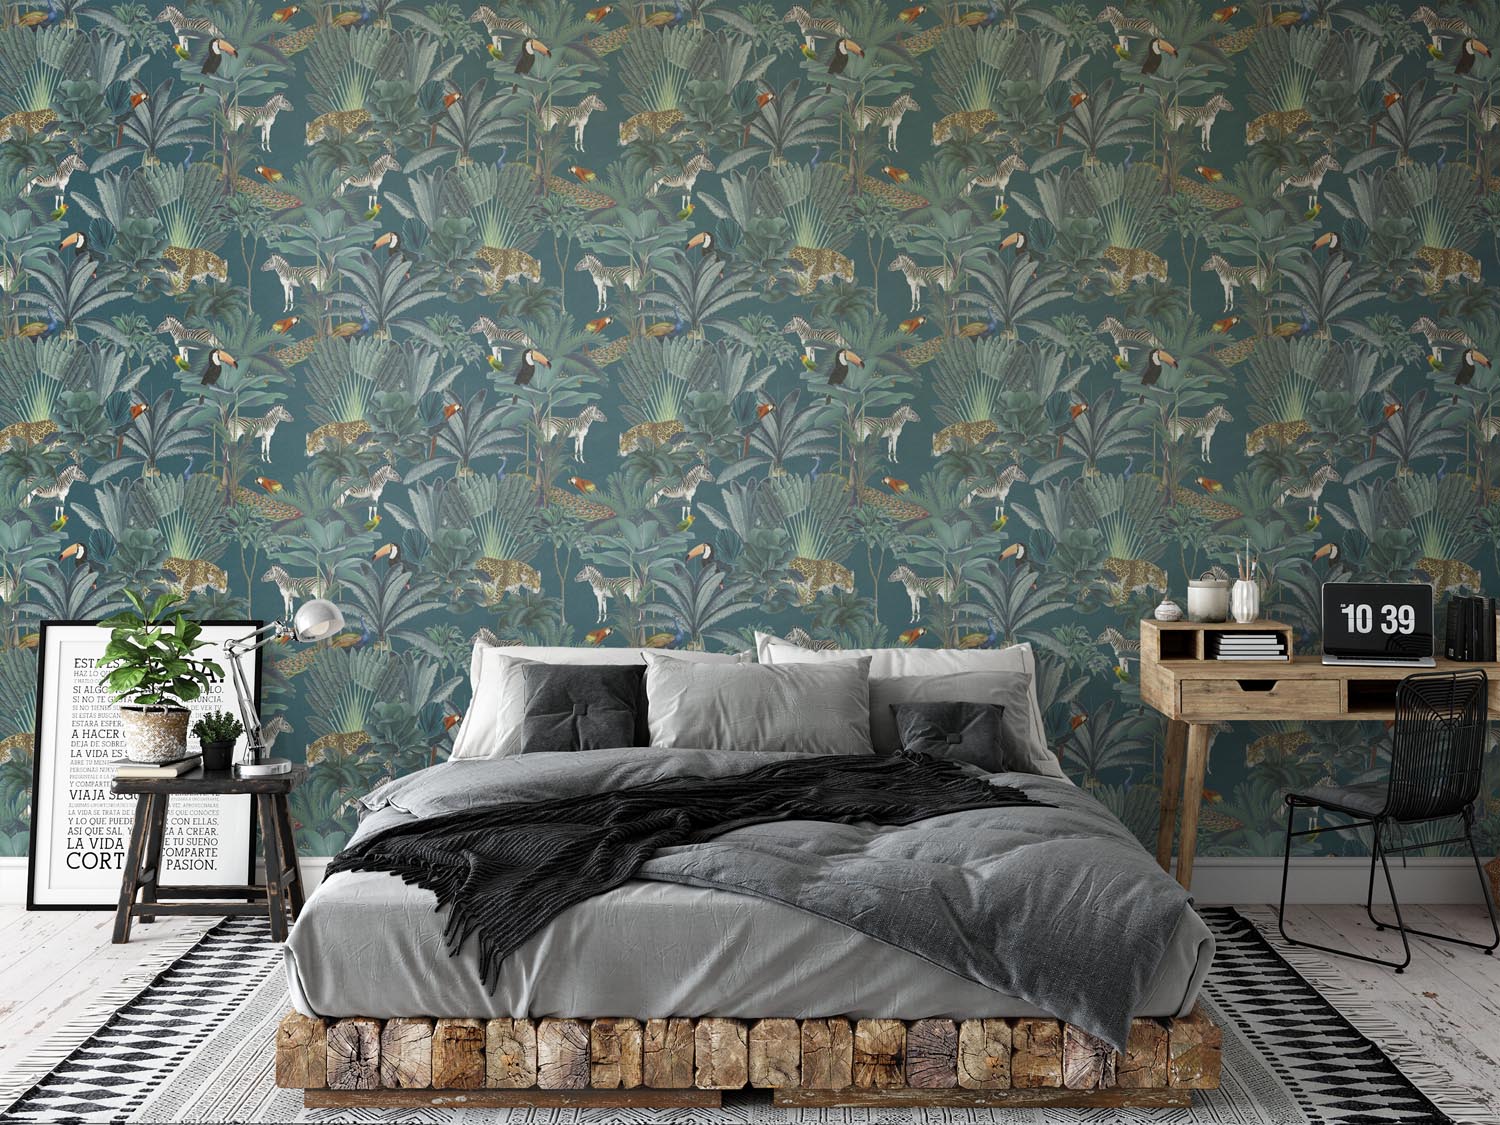 East India Made-to-Measure Wallpaper - USTAD HOME